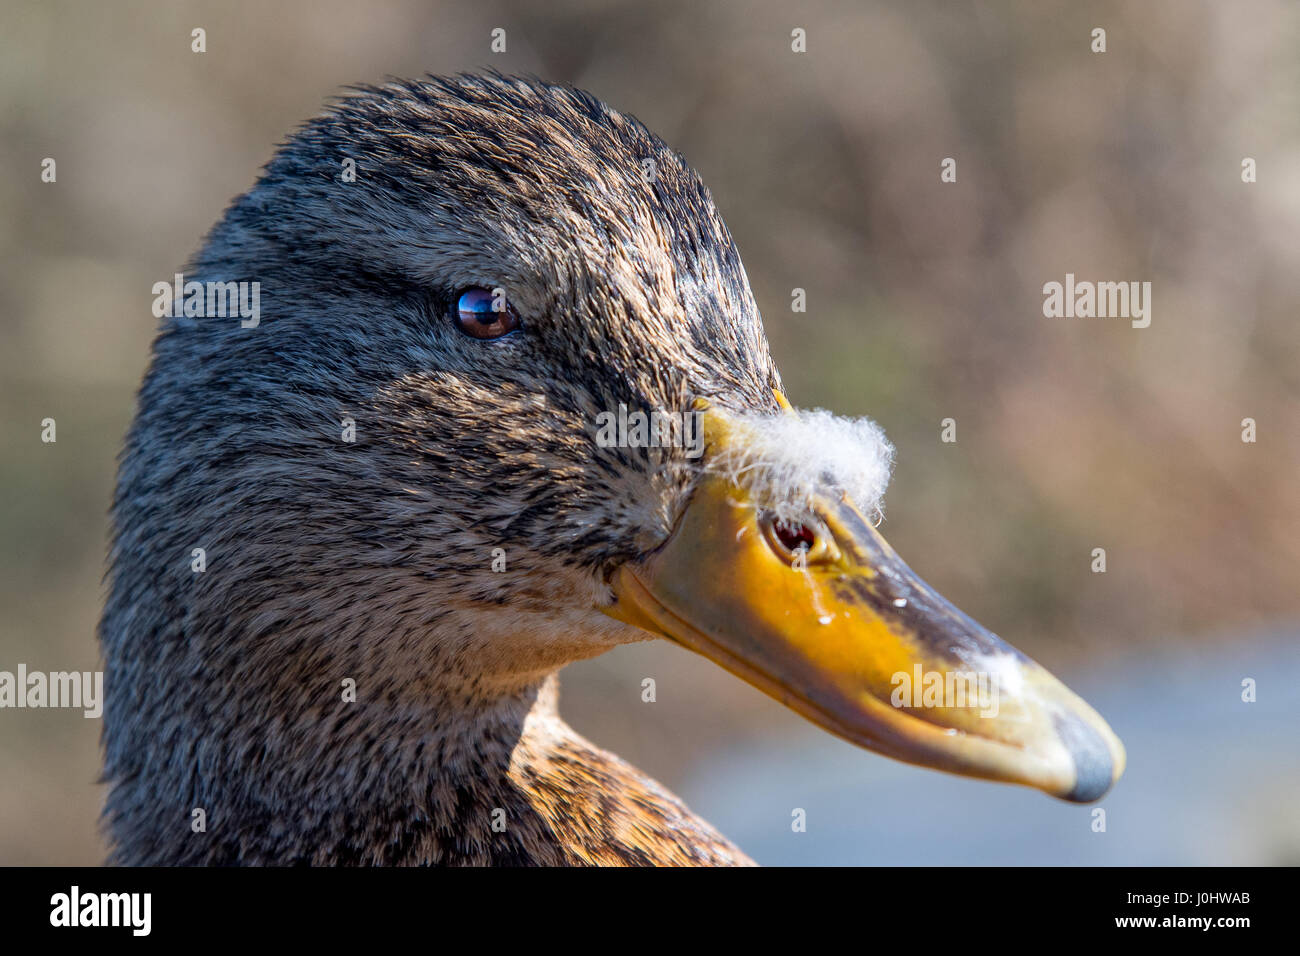 A portrait of a female mallard duck. She looks directly at the camera and has a spring fluff of flowers on her yellow beak. Stock Photo